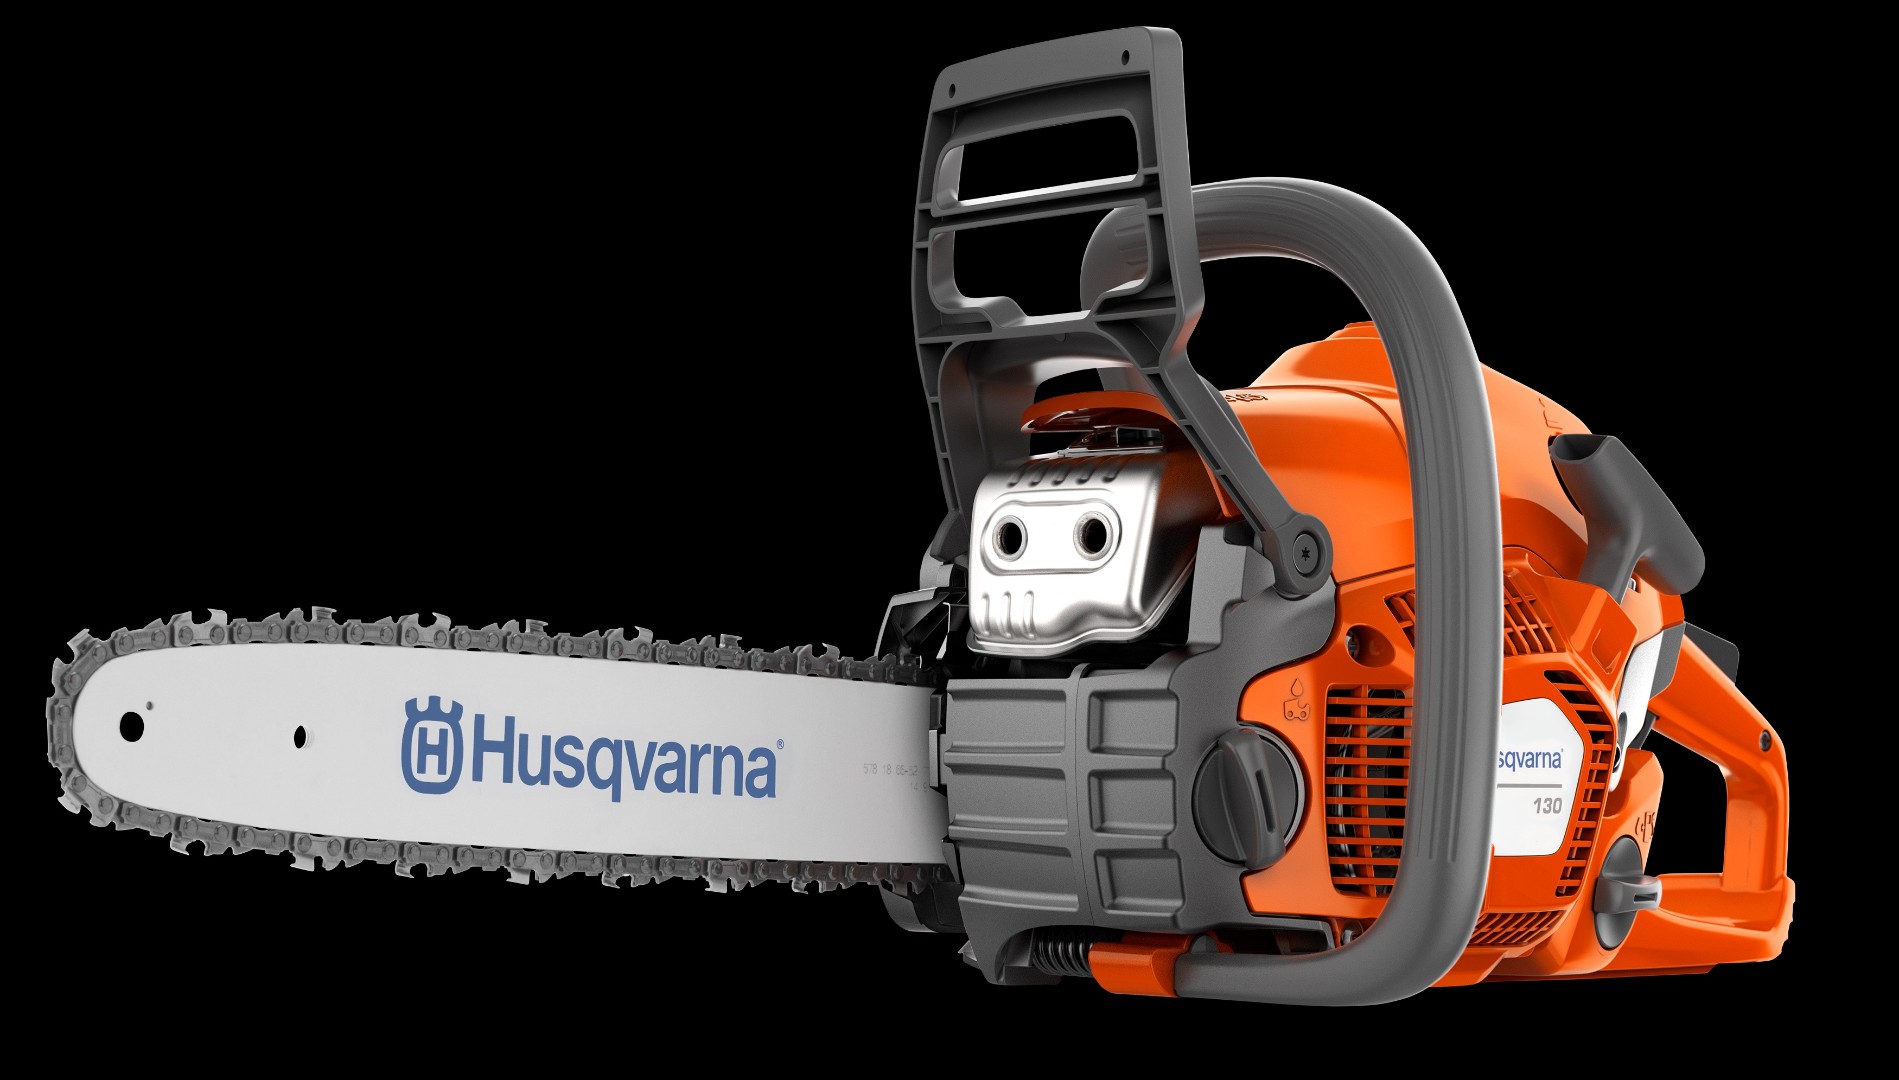 Husqvarna 130 - South Side Sales - Power Equipment, Snowmobiles, Mowers,  Tractors and More